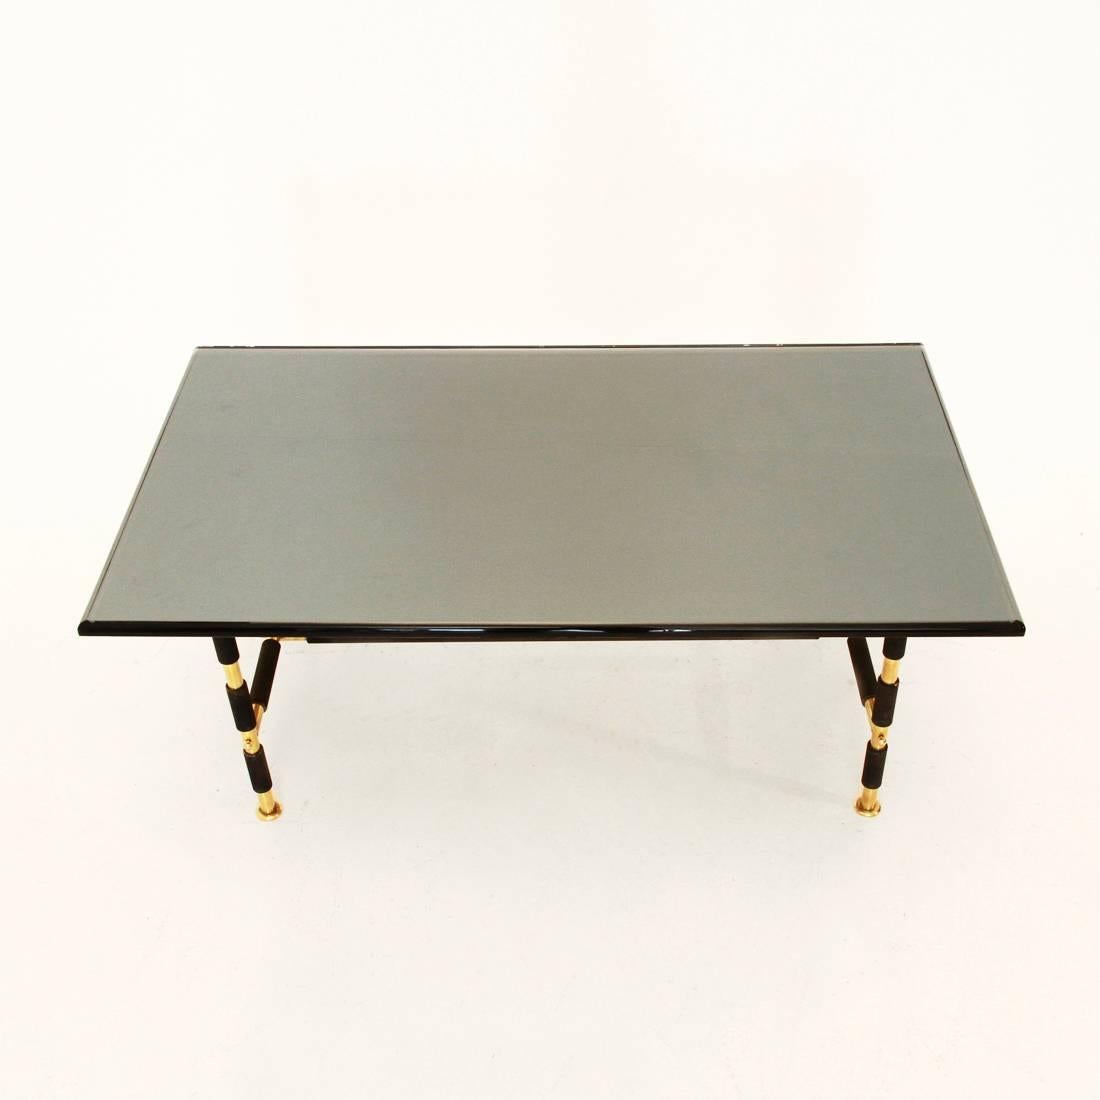 This coffee table, model 1736, was produced by Fontana Arte in 1955. It features a lacquered metal and brass frame and a beveled and mirrored glass top. In a good vintage condition.